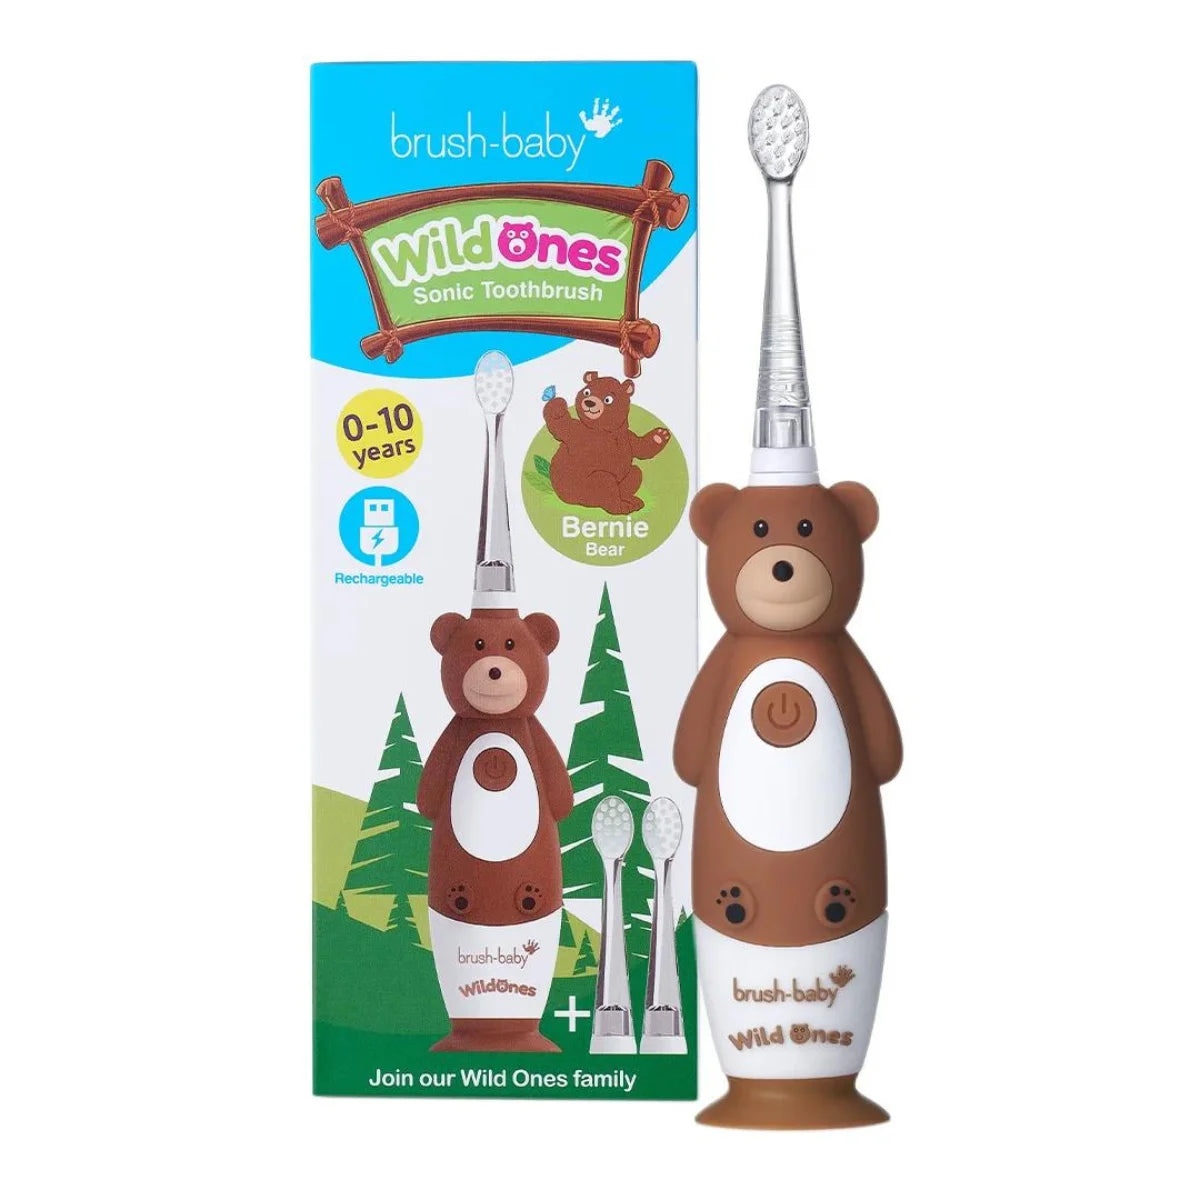 Brown and White Bernie Bear WildOnes kids sonic electric toothbrush in front of packaging for young children